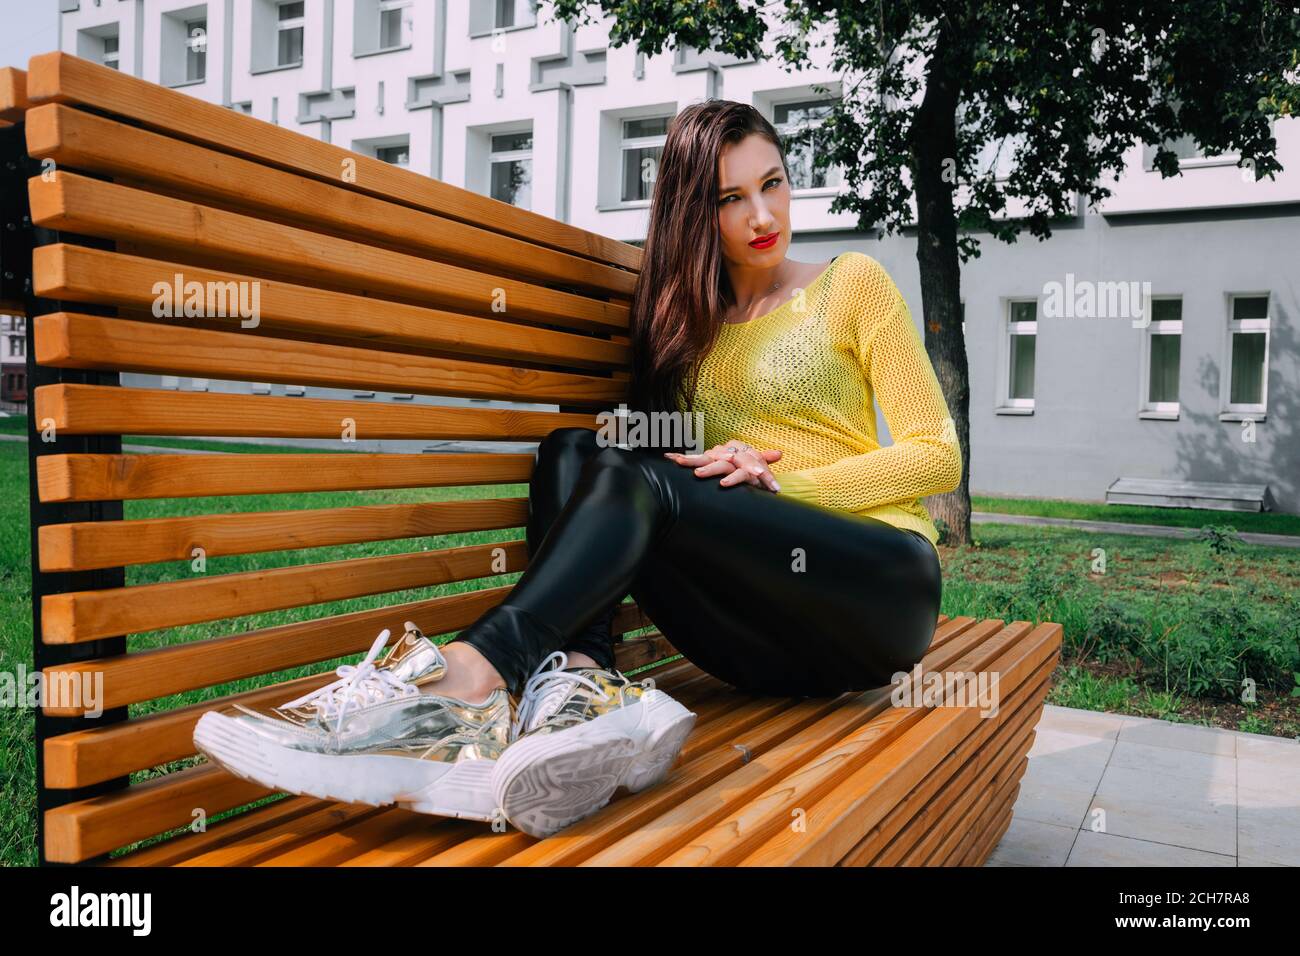 https://c8.alamy.com/comp/2CH7RA8/pretty-girl-with-long-dark-hair-is-wearing-a-bright-yellow-sweater-shiny-tight-dark-leggings-and-golden-sneakers-she-sits-outside-on-a-wooden-bench-2CH7RA8.jpg